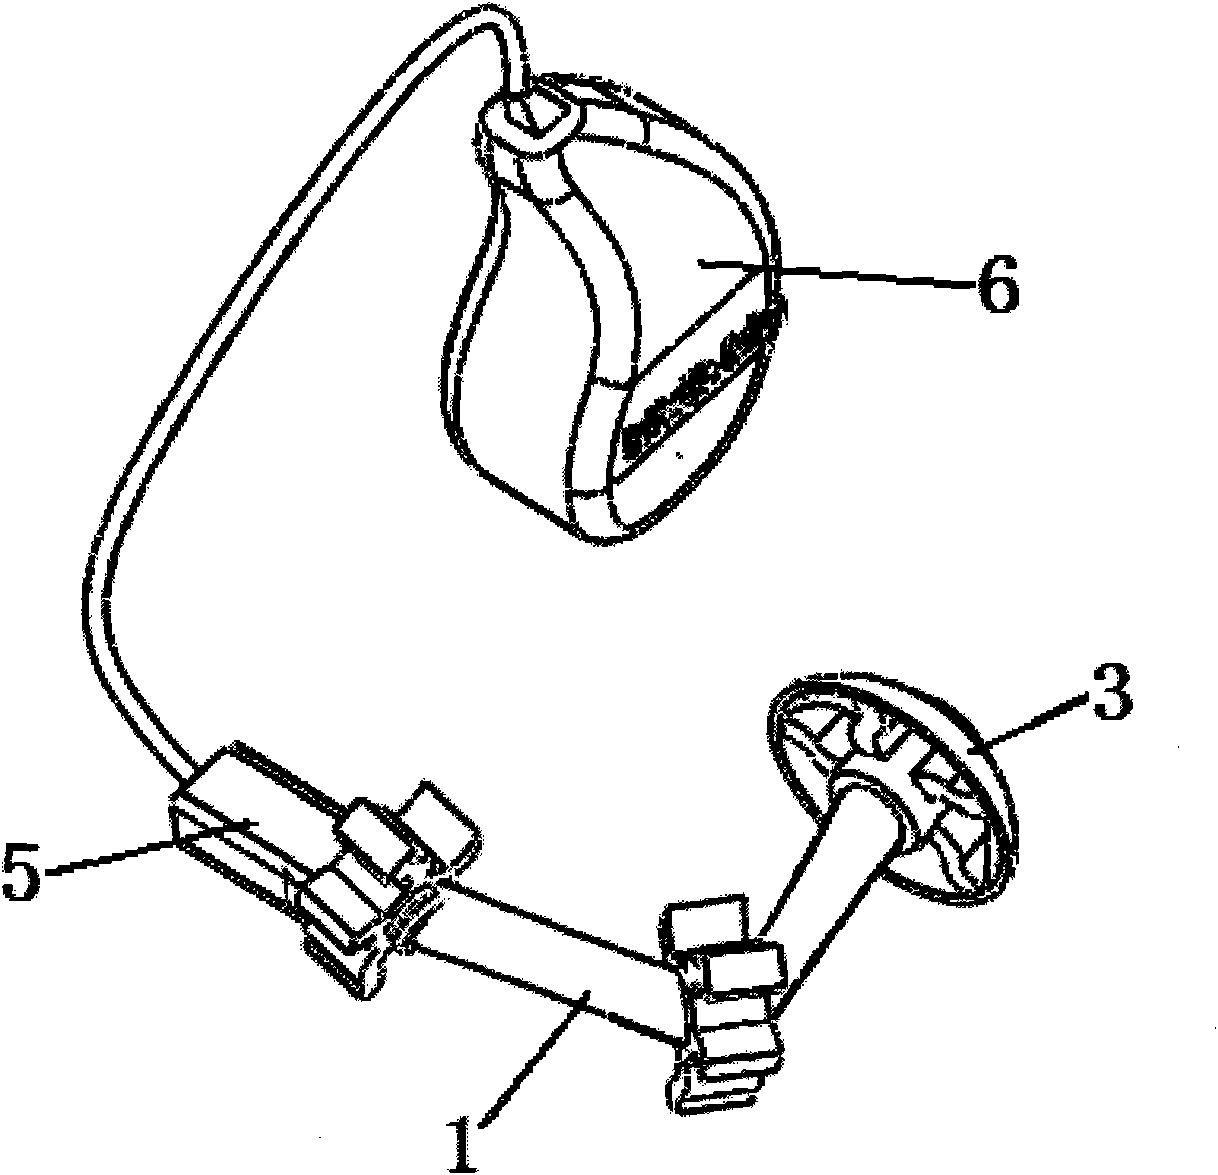 Ear-carried type hearing aid for receiving sound in ears